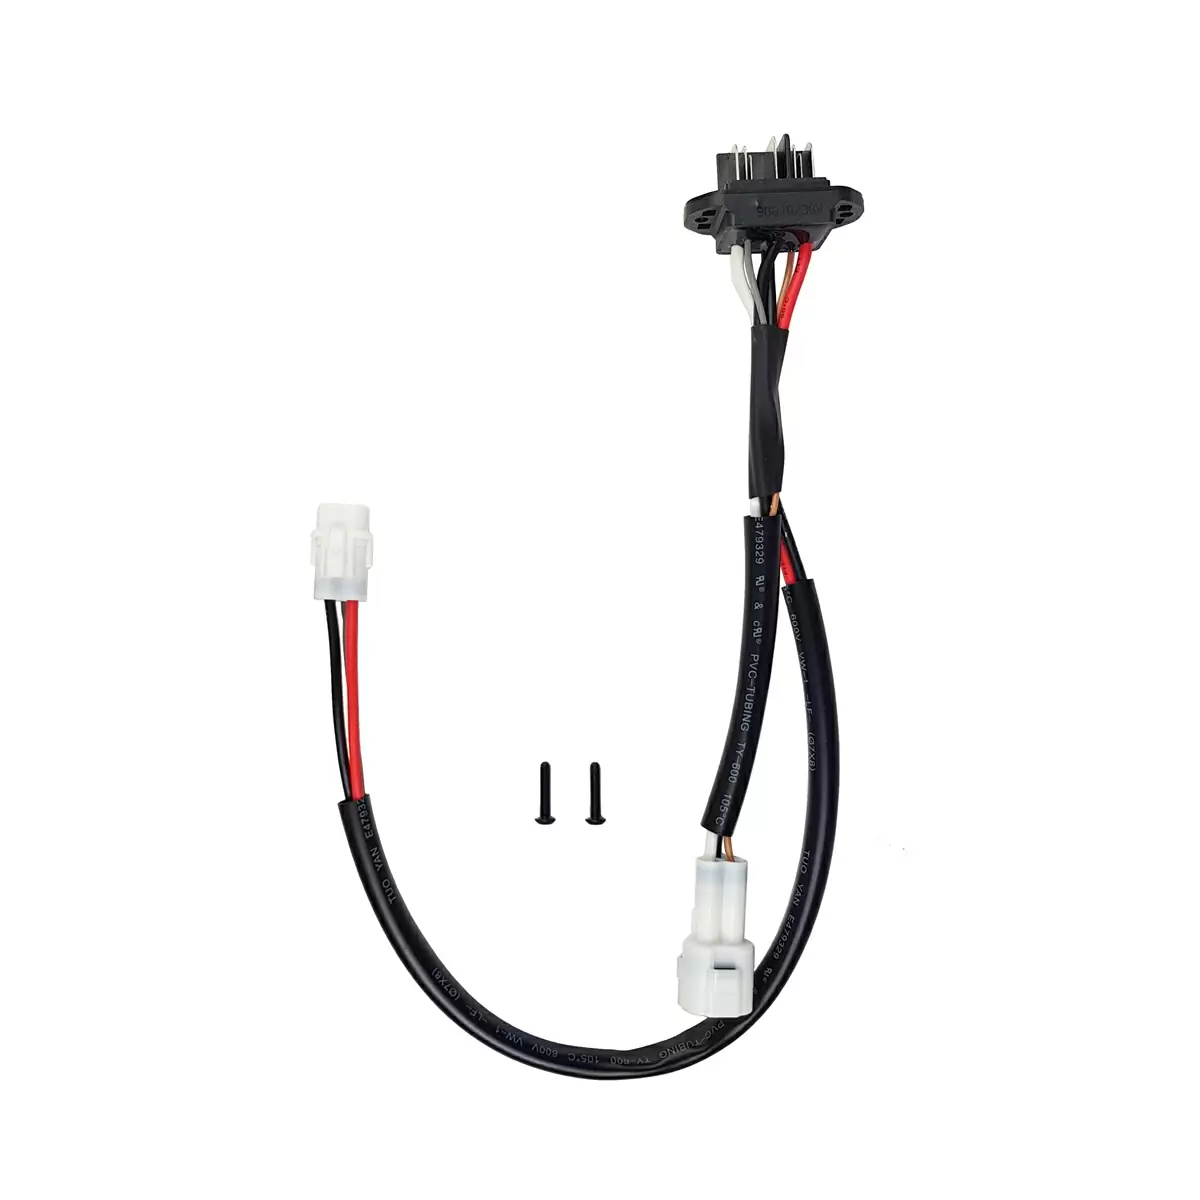 Simplo 630w motor - battery connection cable - image